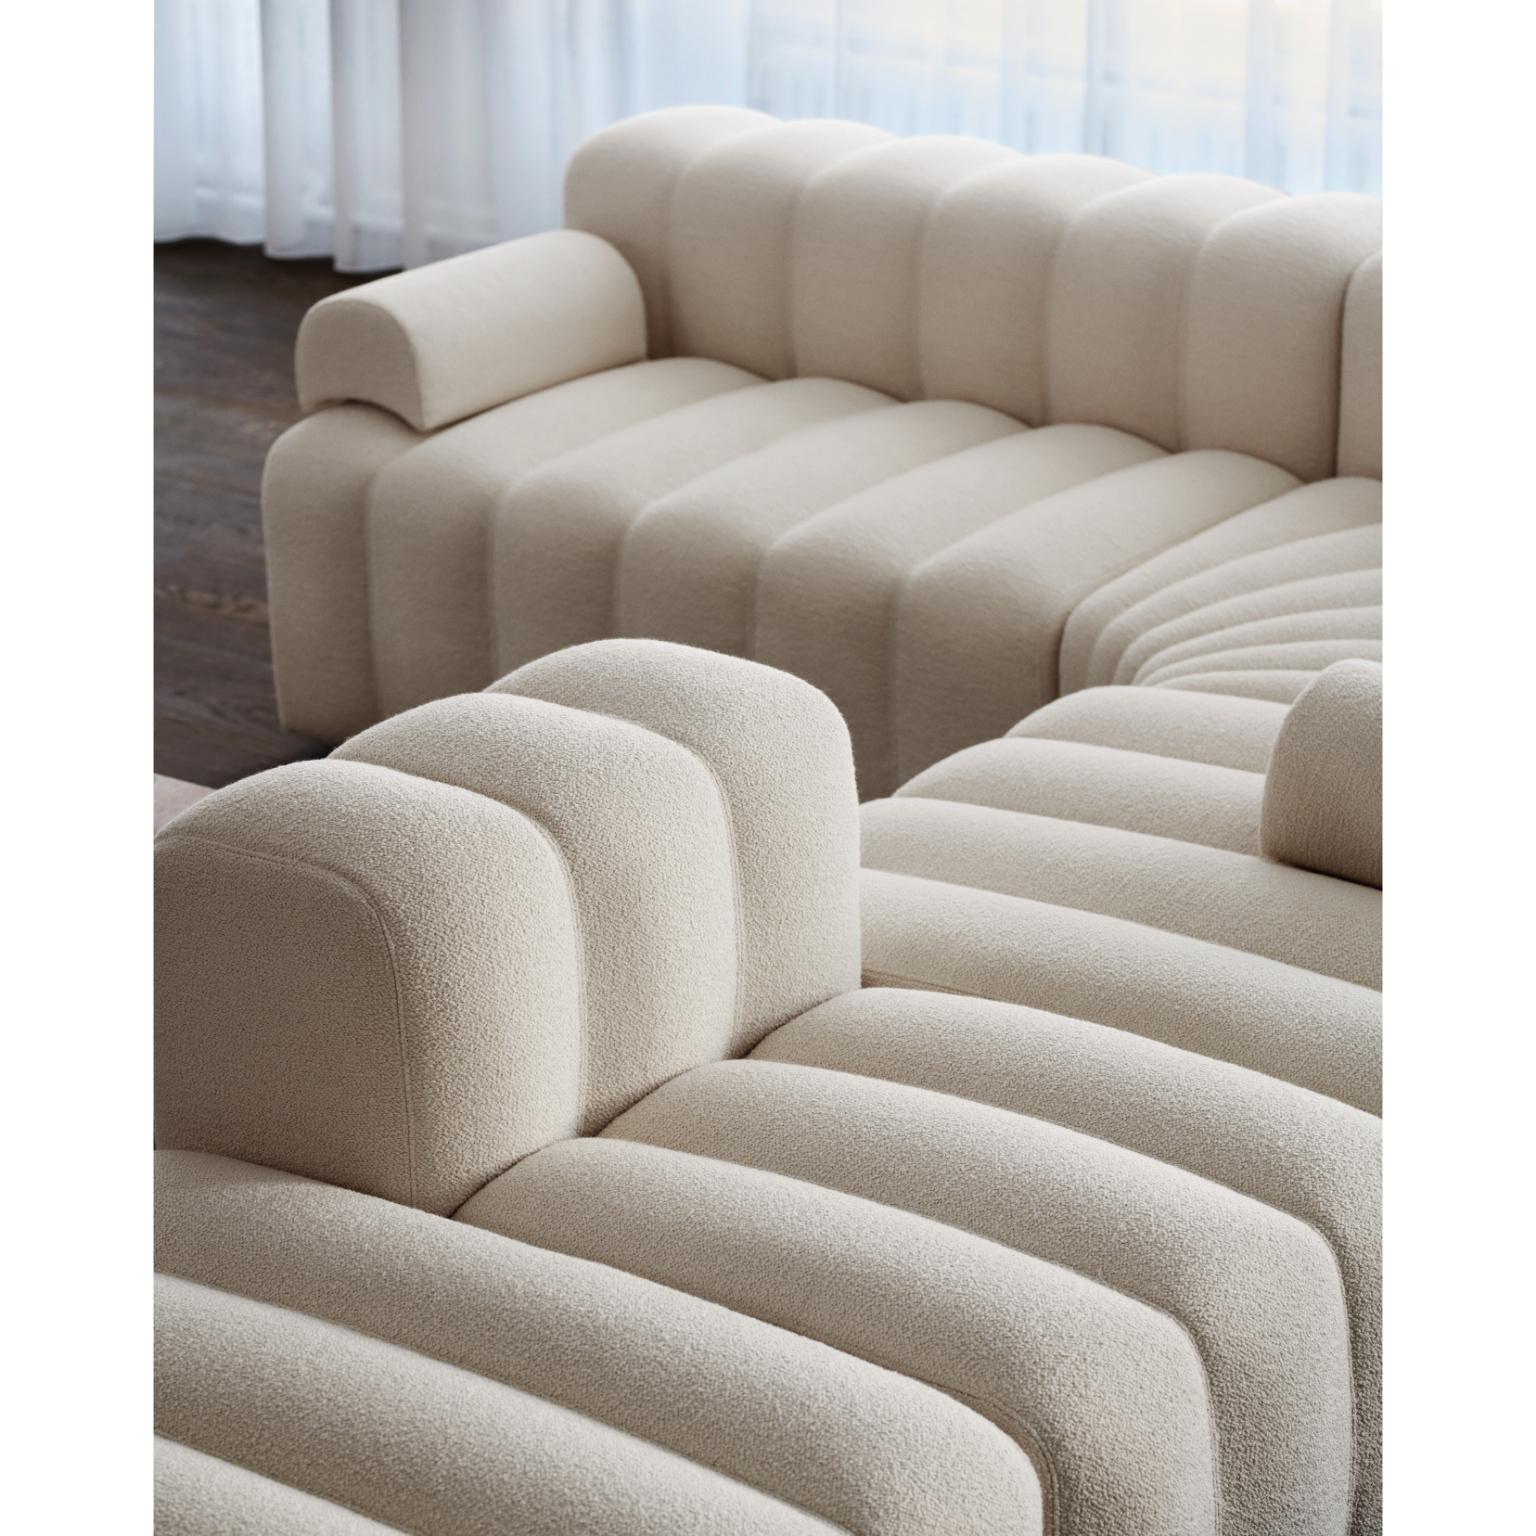 Studio Lounge Small Right Modular Sofa With Armrest by NORR11
Dimensions: D 130 x W 93 x H 70 cm. SH 47 cm. 
Materials: Foam, wood and upholstery.
Upholstery: Barnum Boucle Color 3.

Available in different upholstery options. A plywood structure